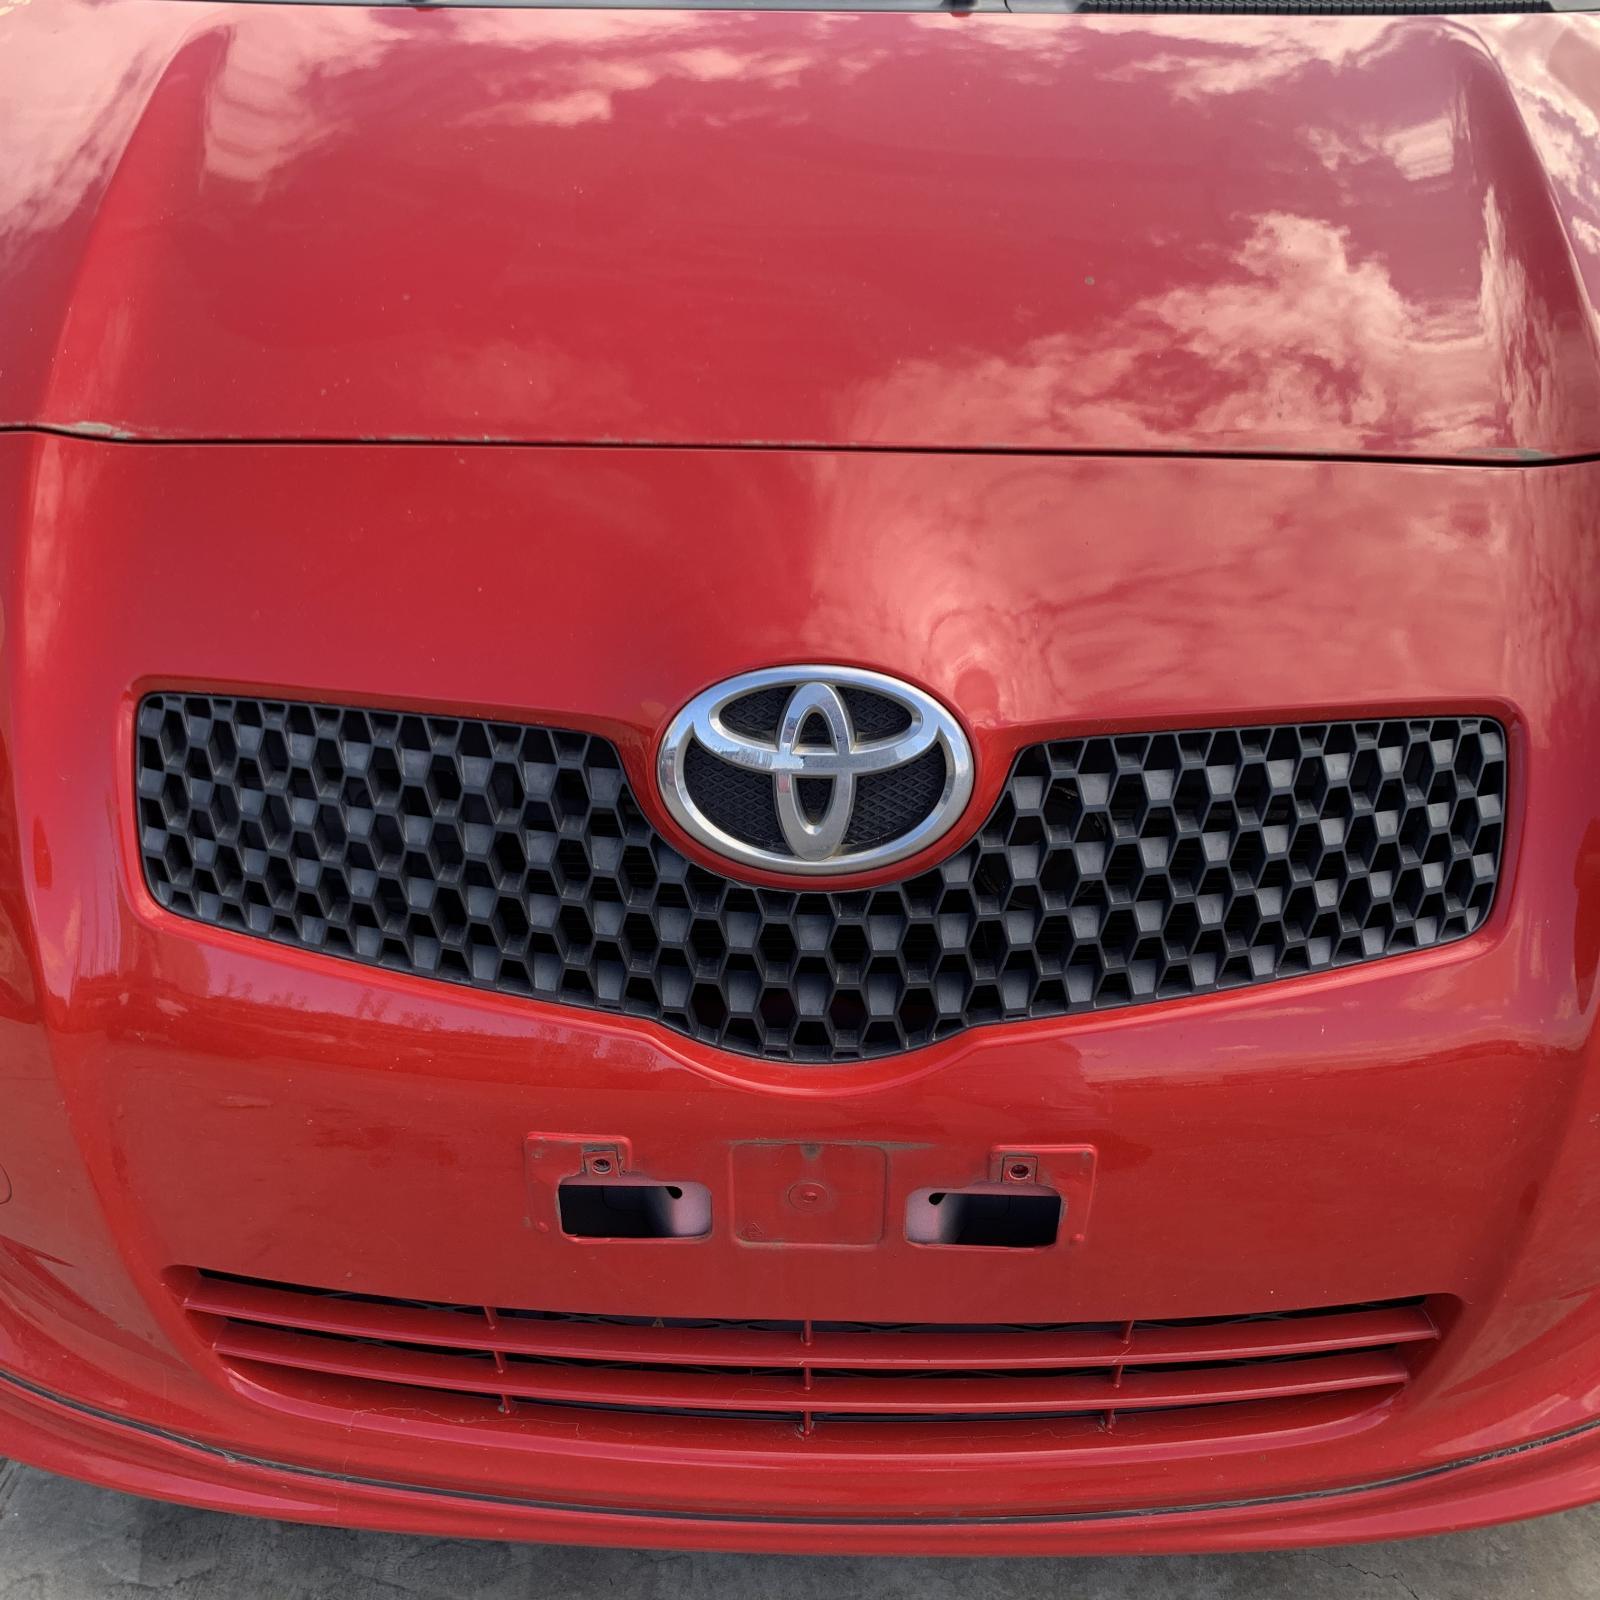 TOYOTA YARIS, Grille, RADIATOR GRILLE, NCP9#, HATCH, 10/05-09/08 (AUS ONLY) 103277